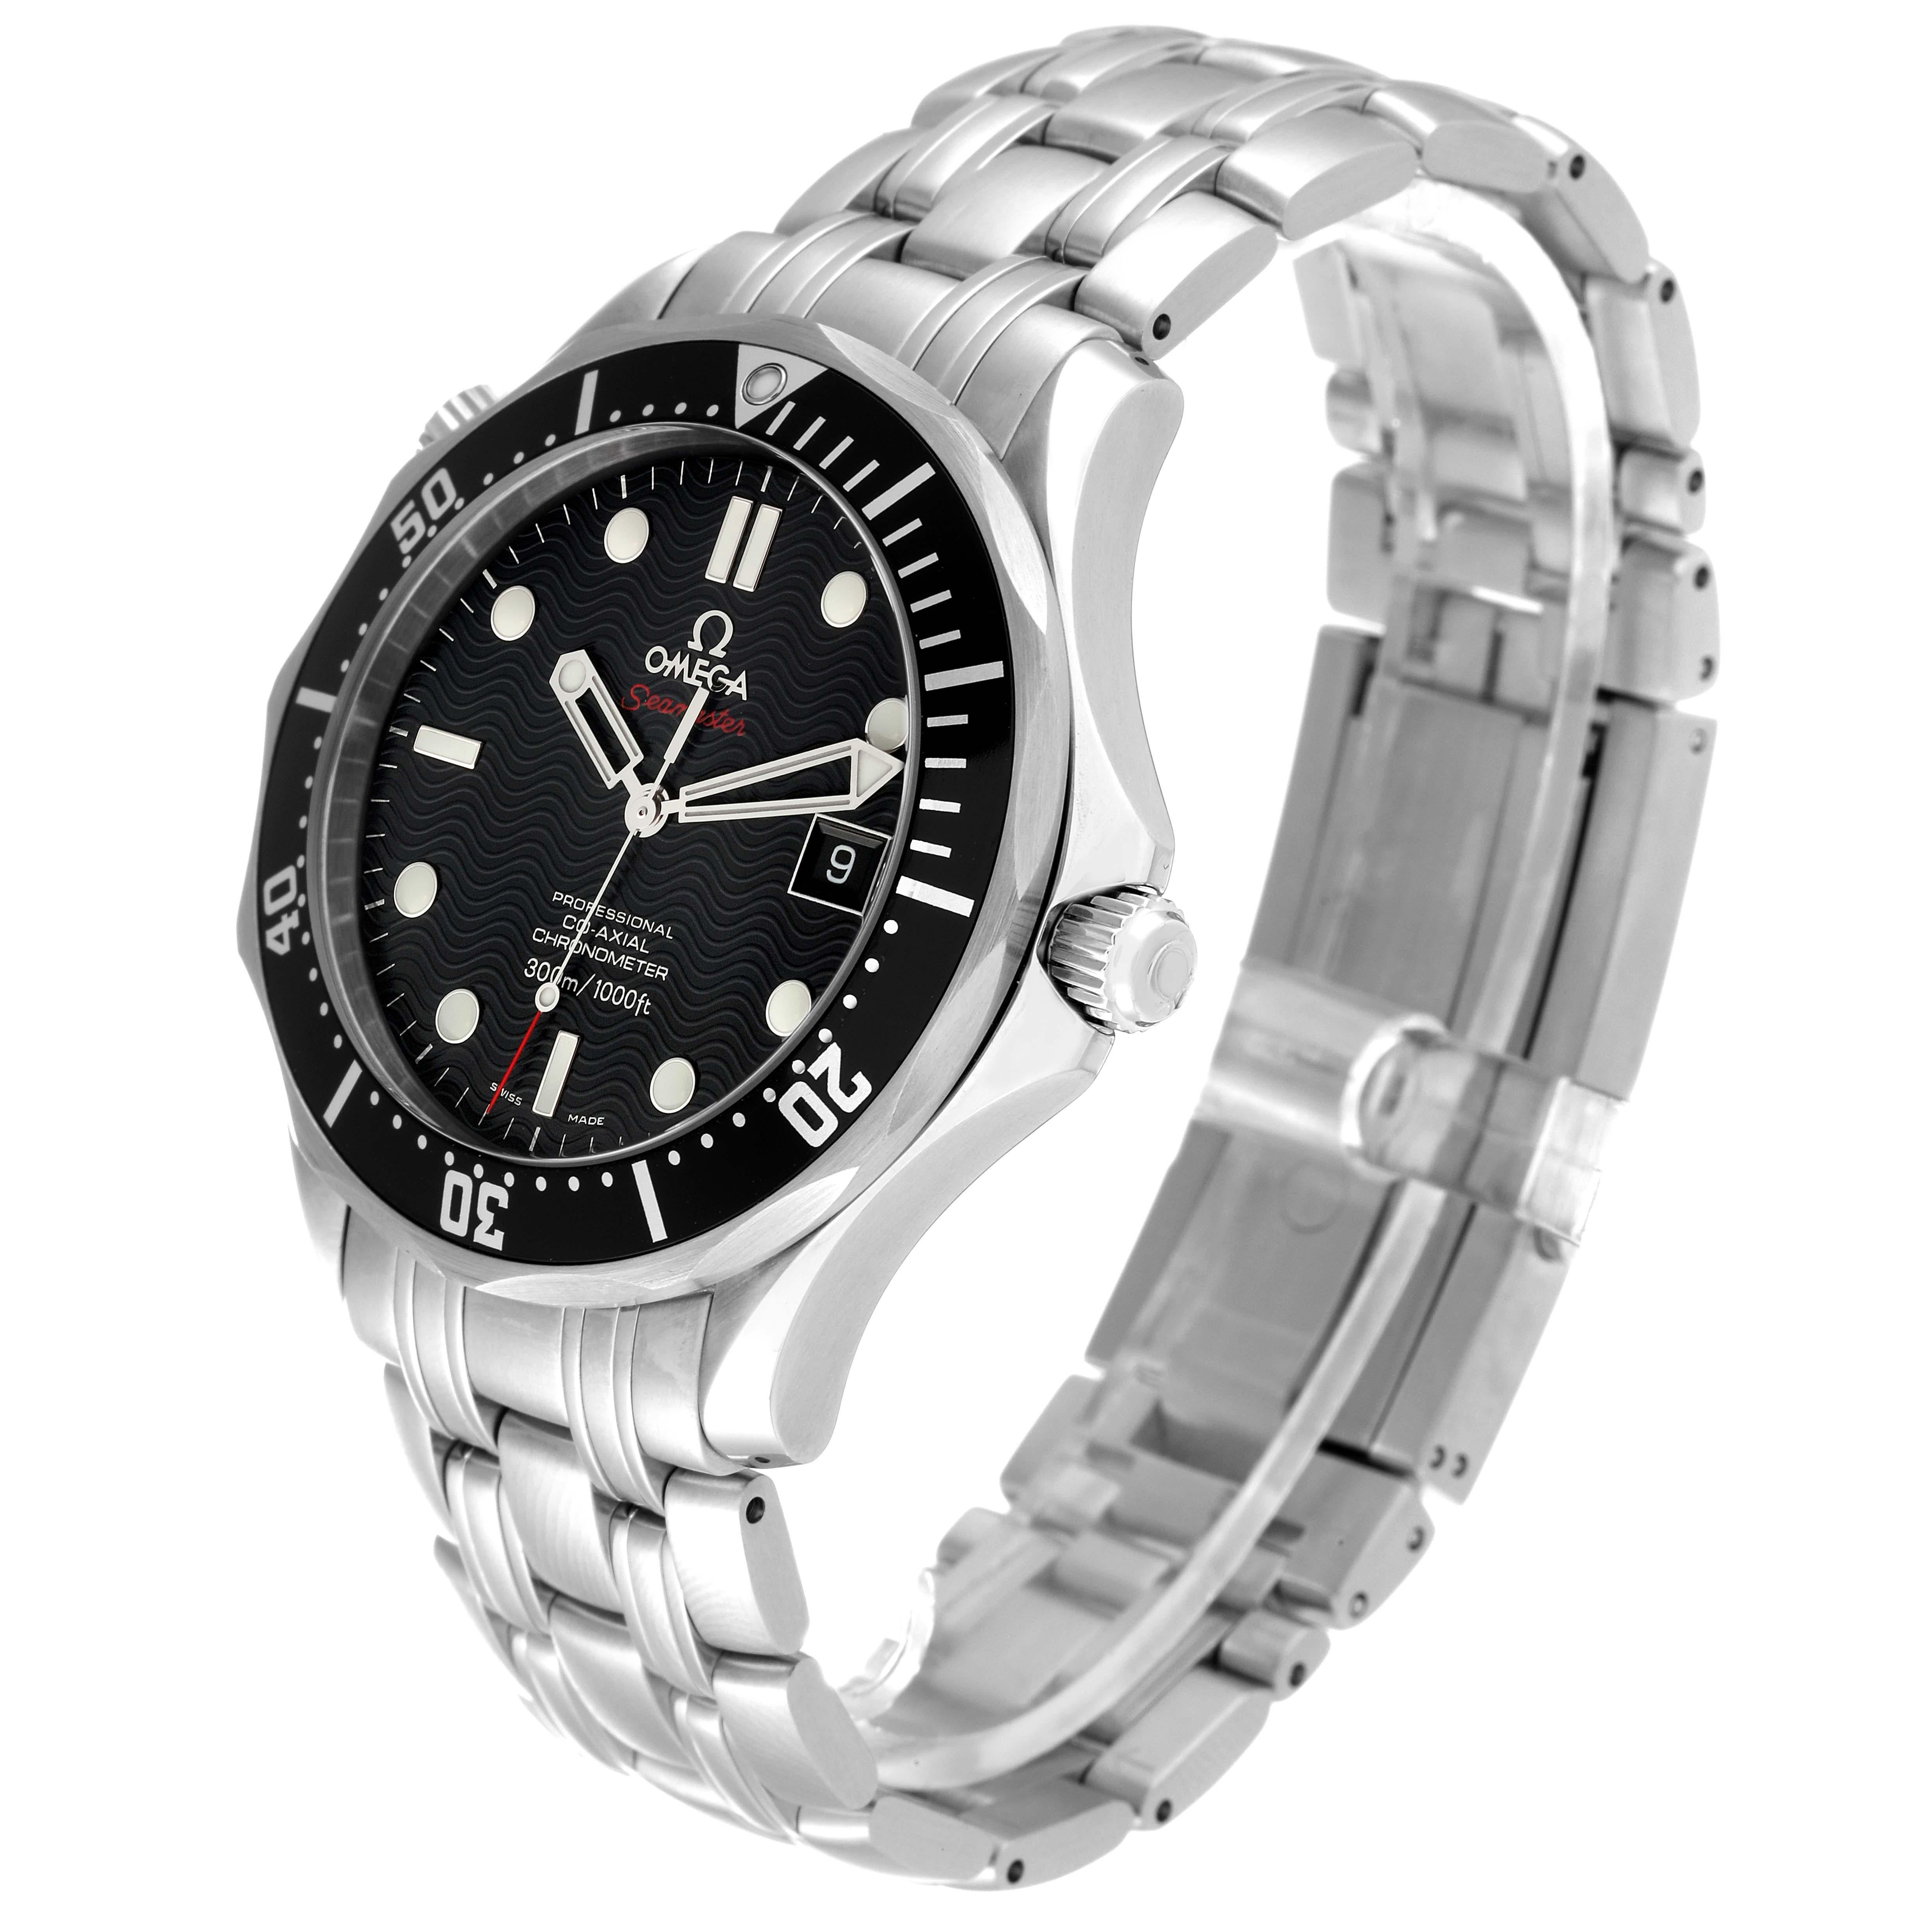  Omega Seamaster Black Dial Steel Mens Watch 212.30.41.20.01.002 Pour hommes 